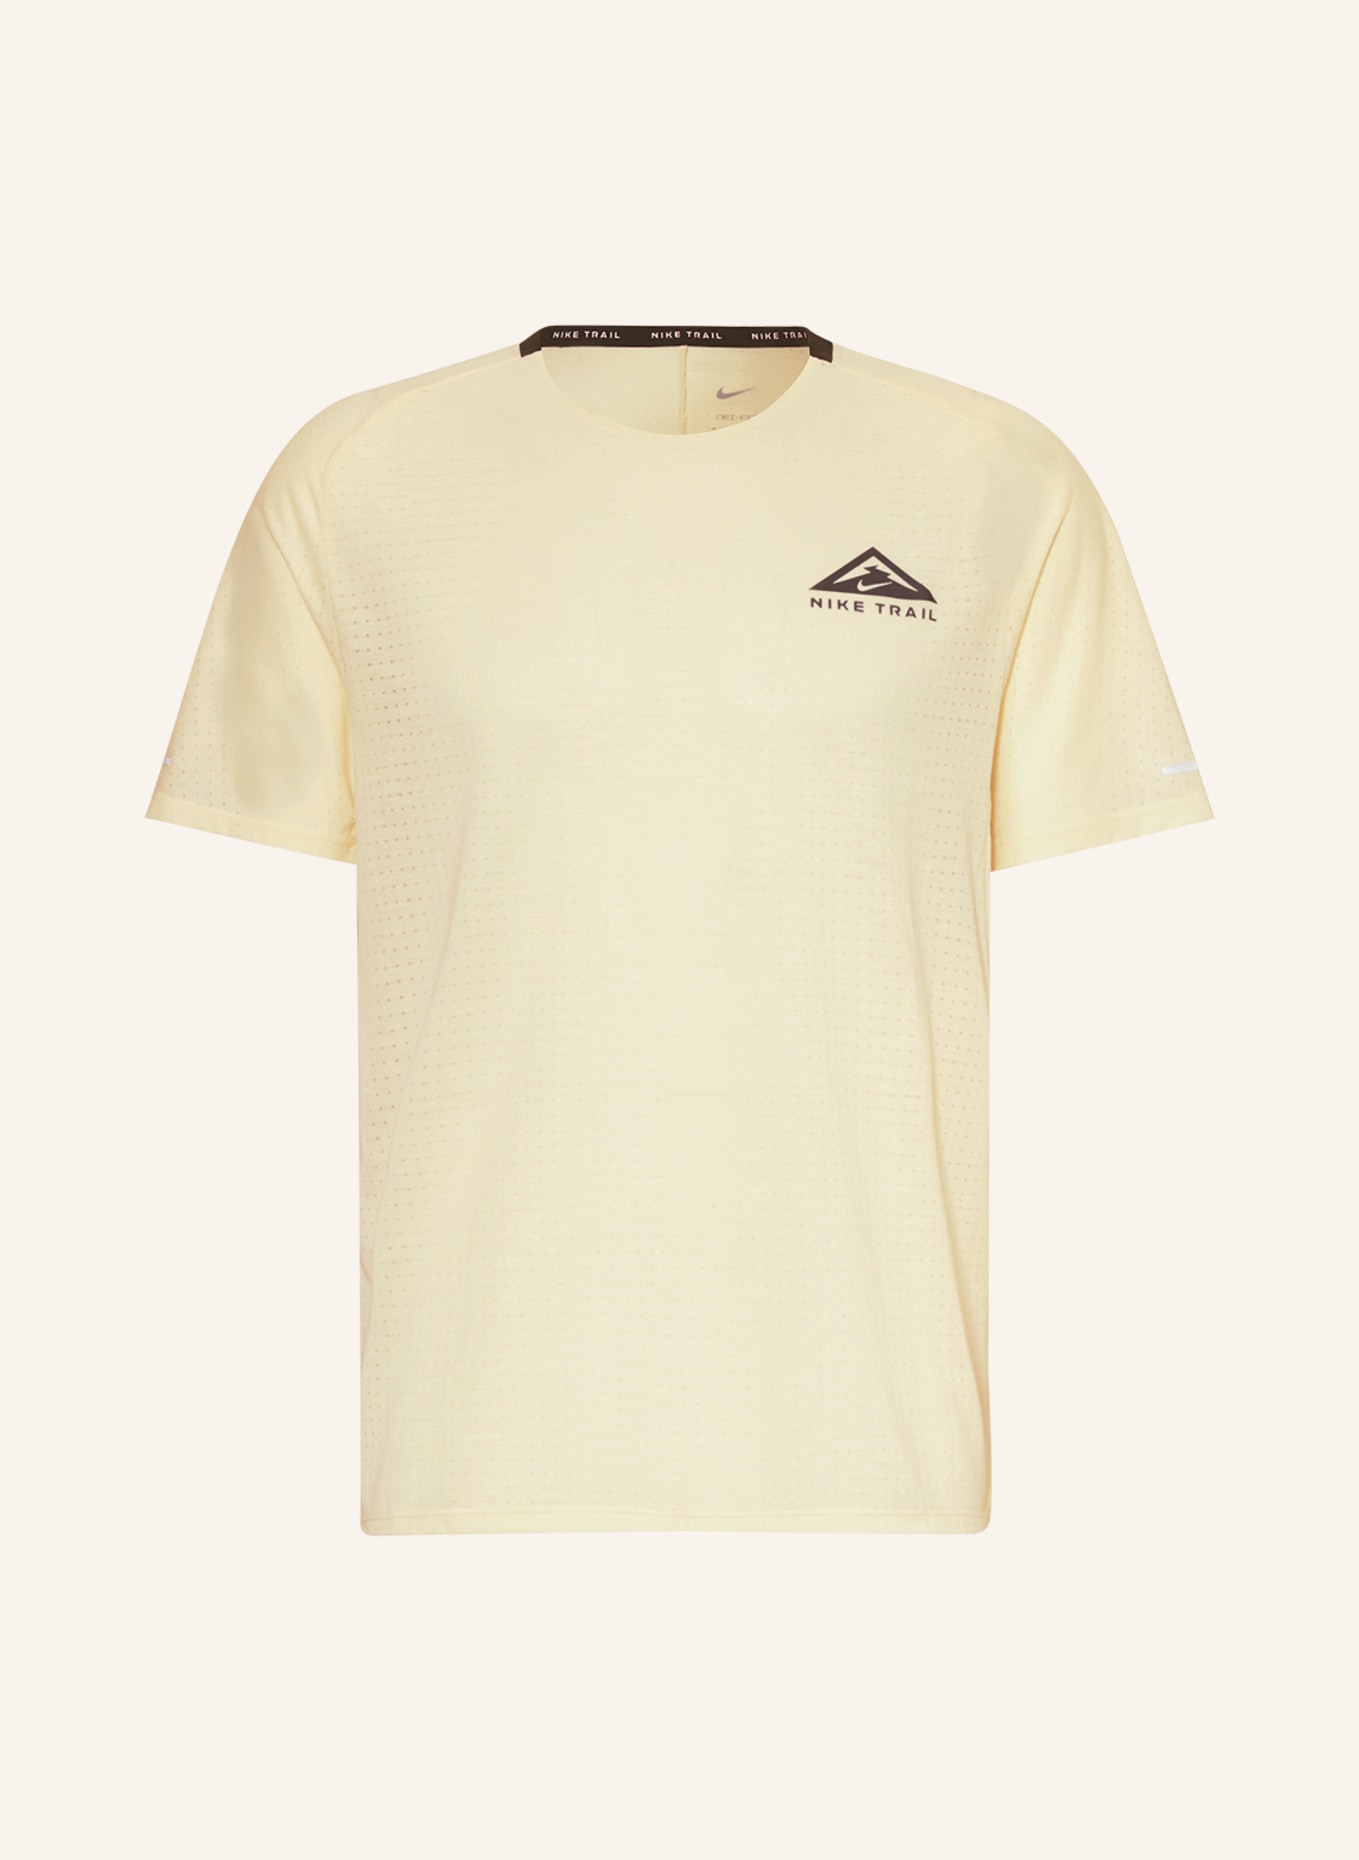 Nike Running shirt DRI-FIT TRAIL SOLAR CHASE, Color: LIGHT YELLOW (Image 1)